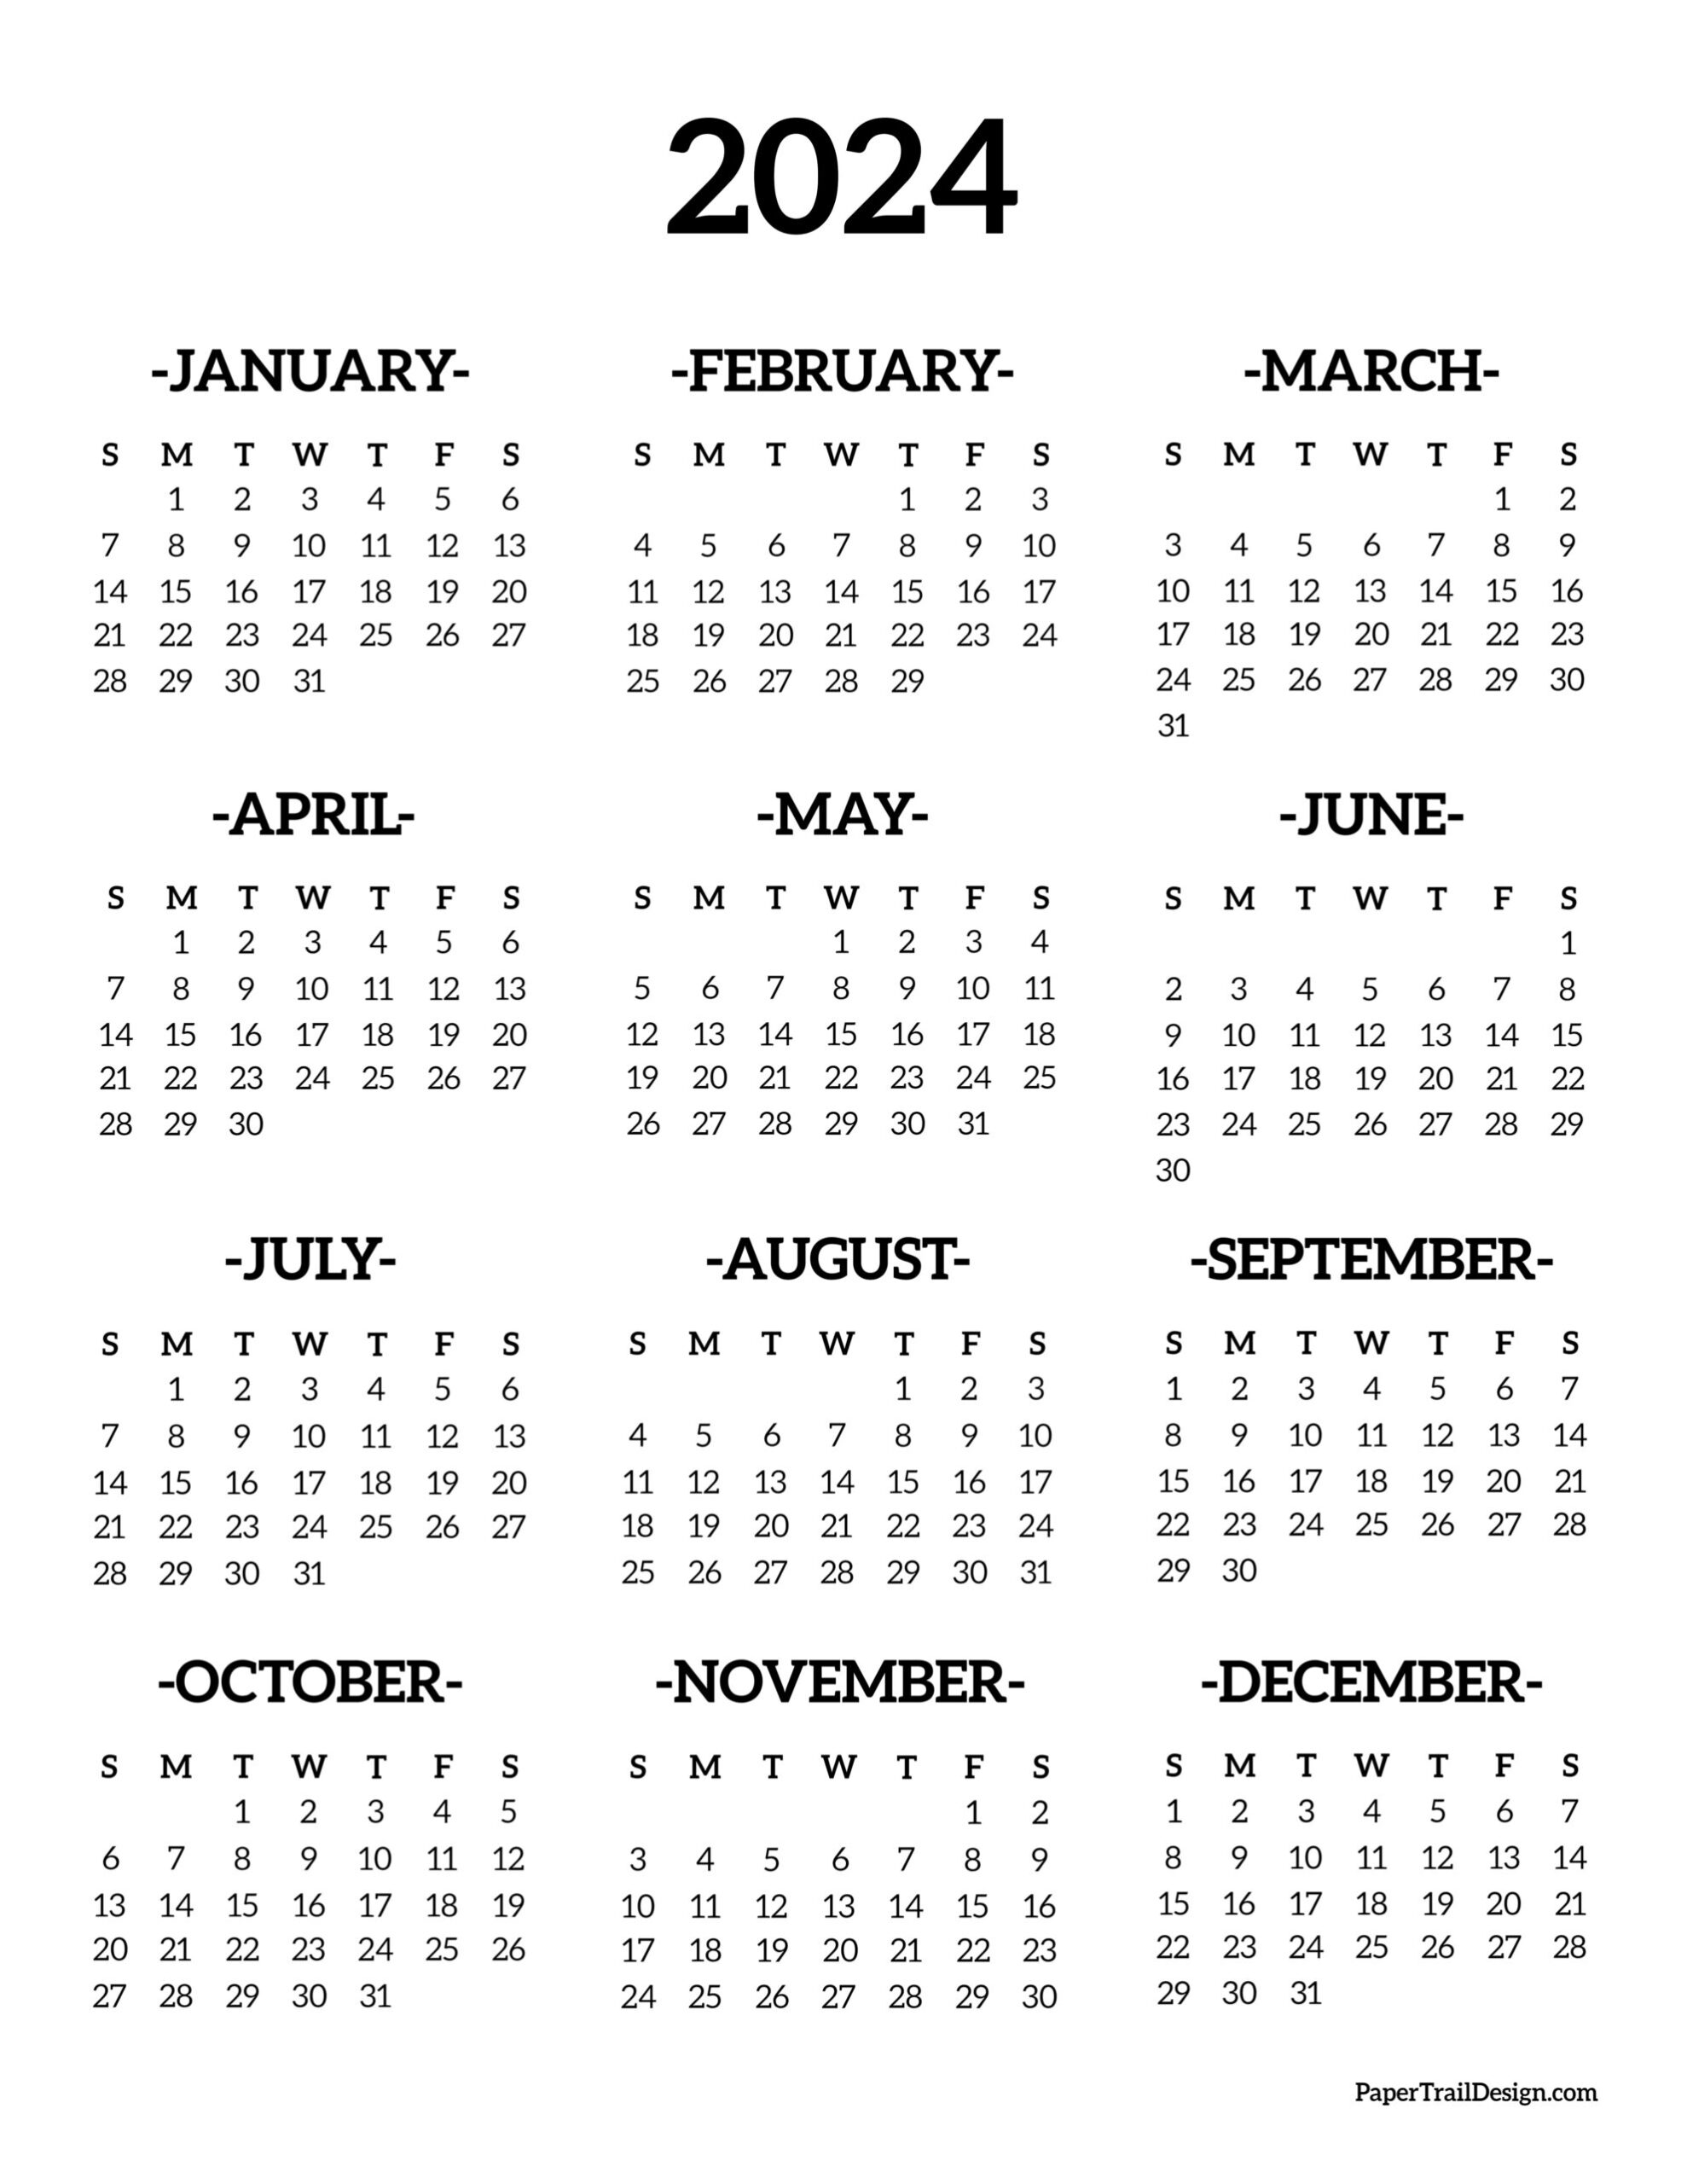 Calendar 2024 Printable One Page - Paper Trail Design for 2024 Yearly Calendar Printable Free